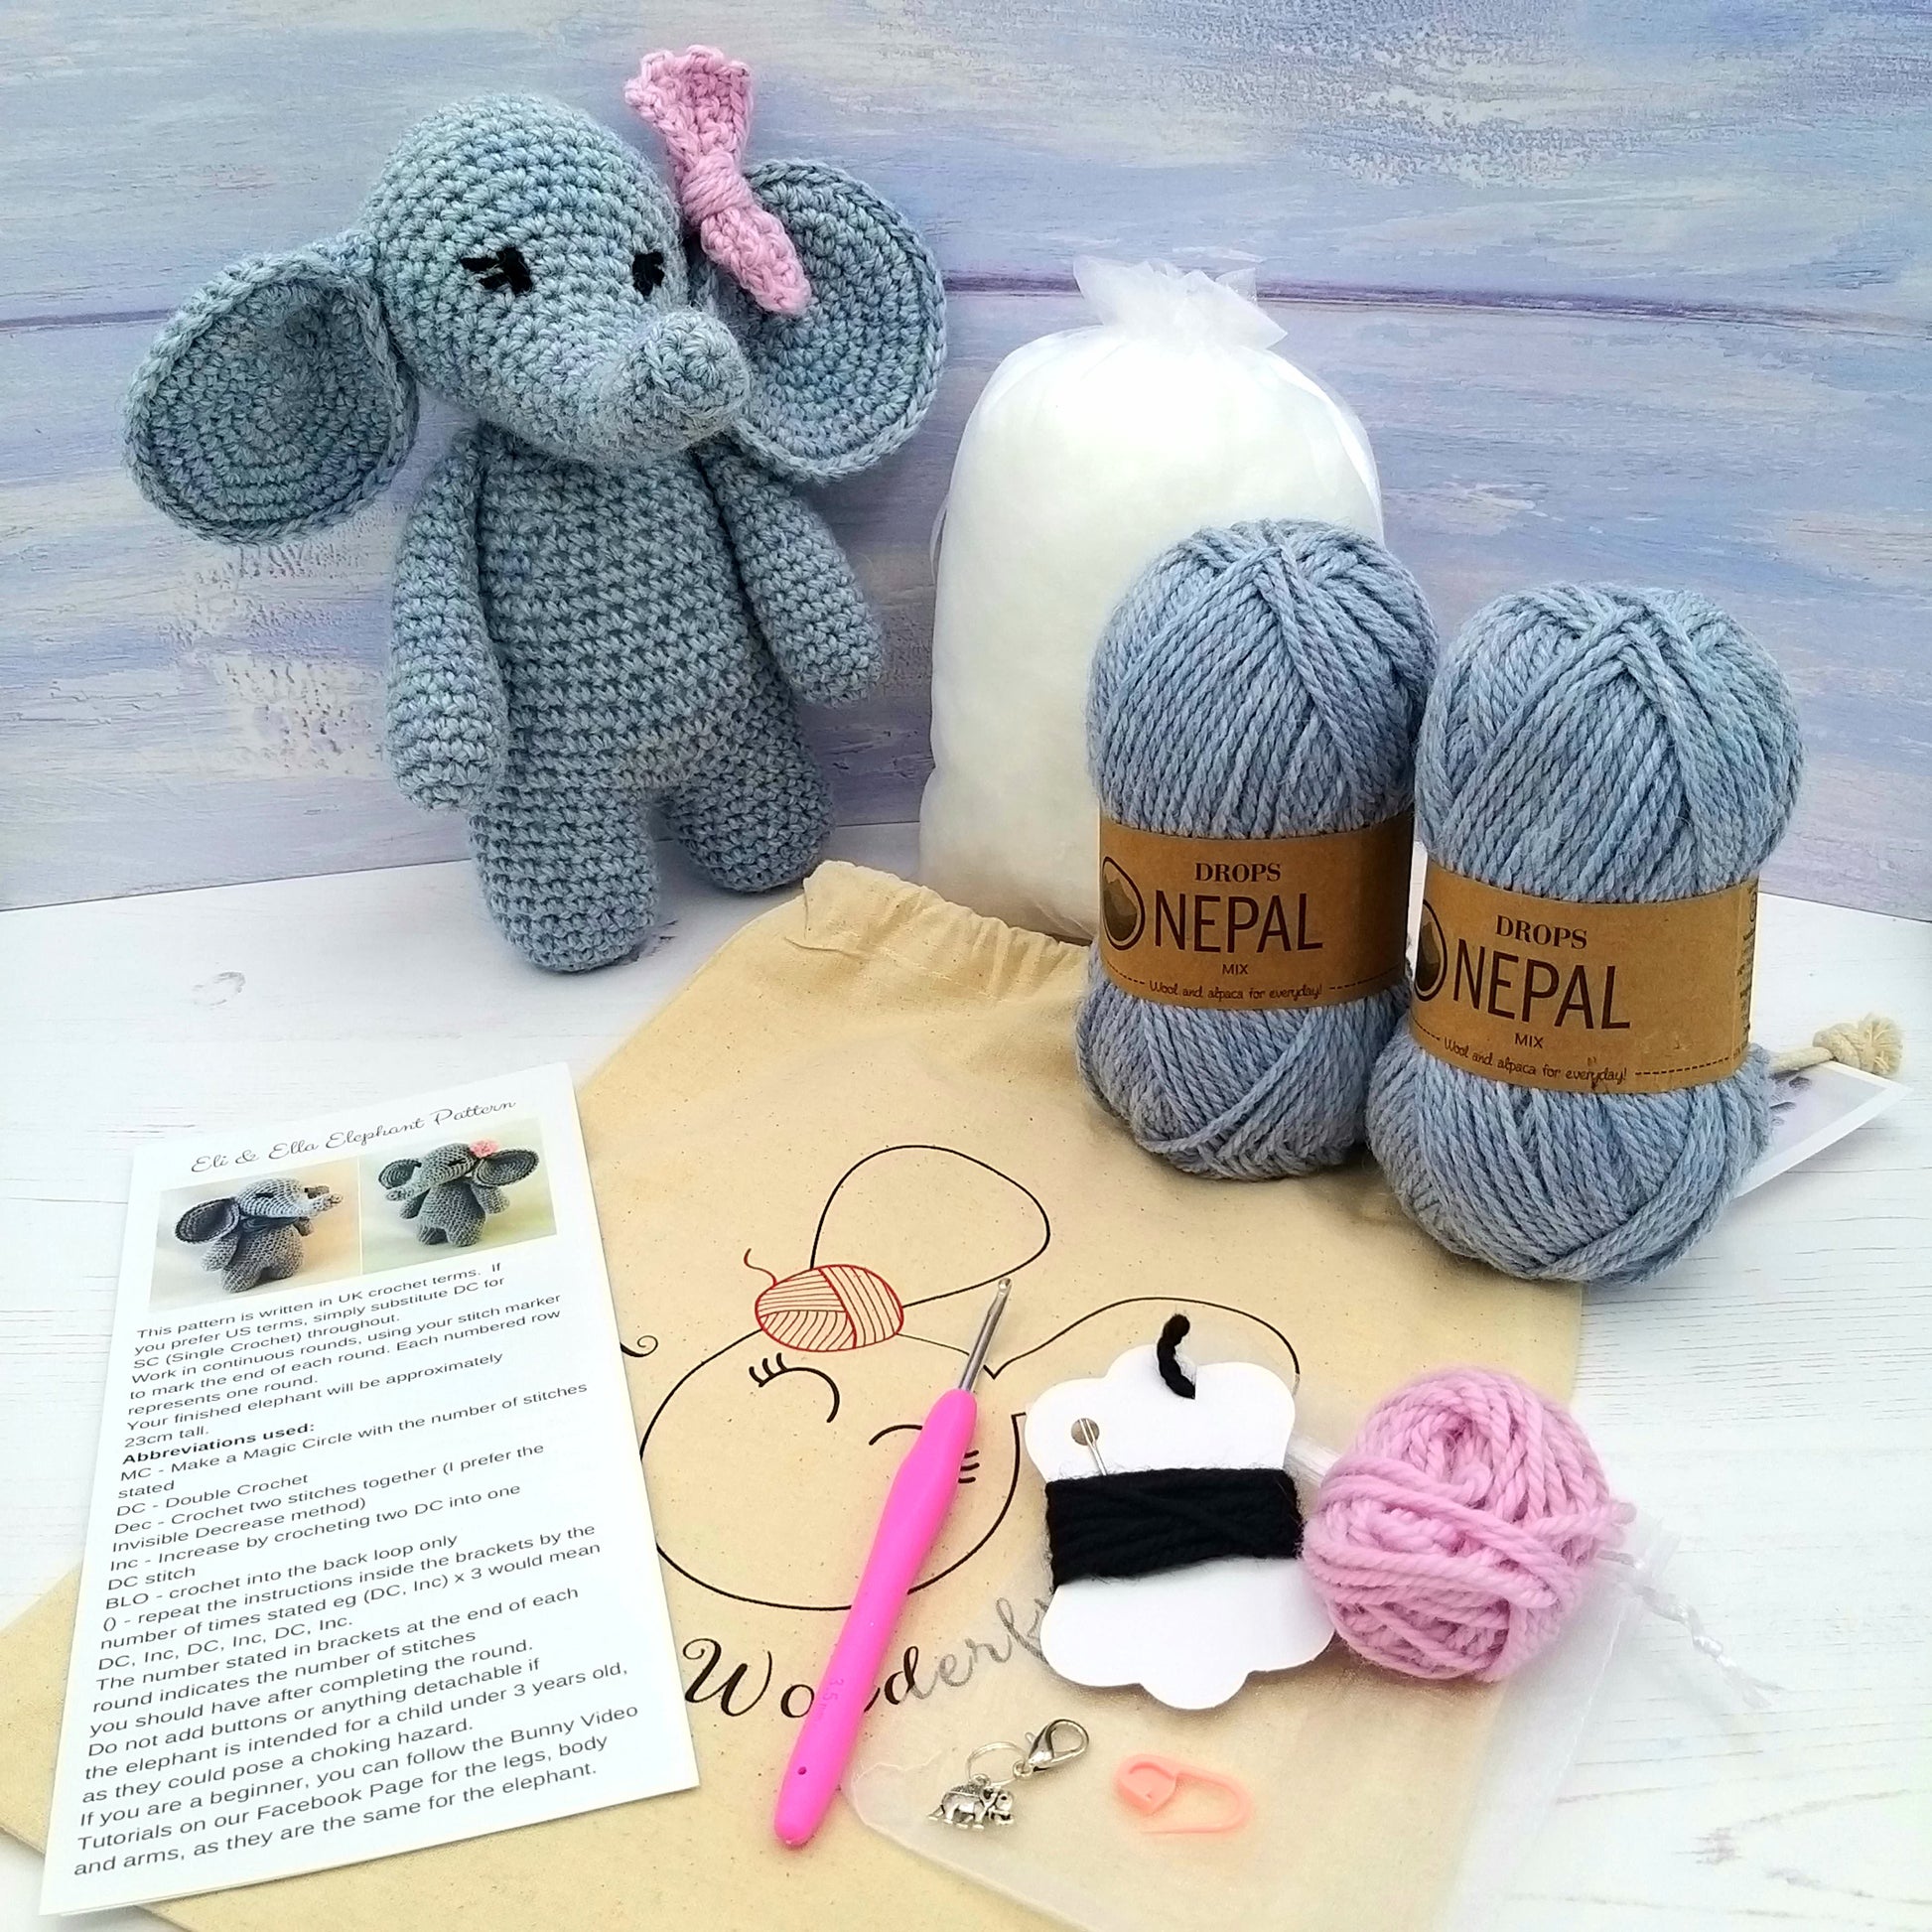 Contents of Elephant Crochet Kit  - Pattern, Wool, STuffing, crochet hook and stitch markers